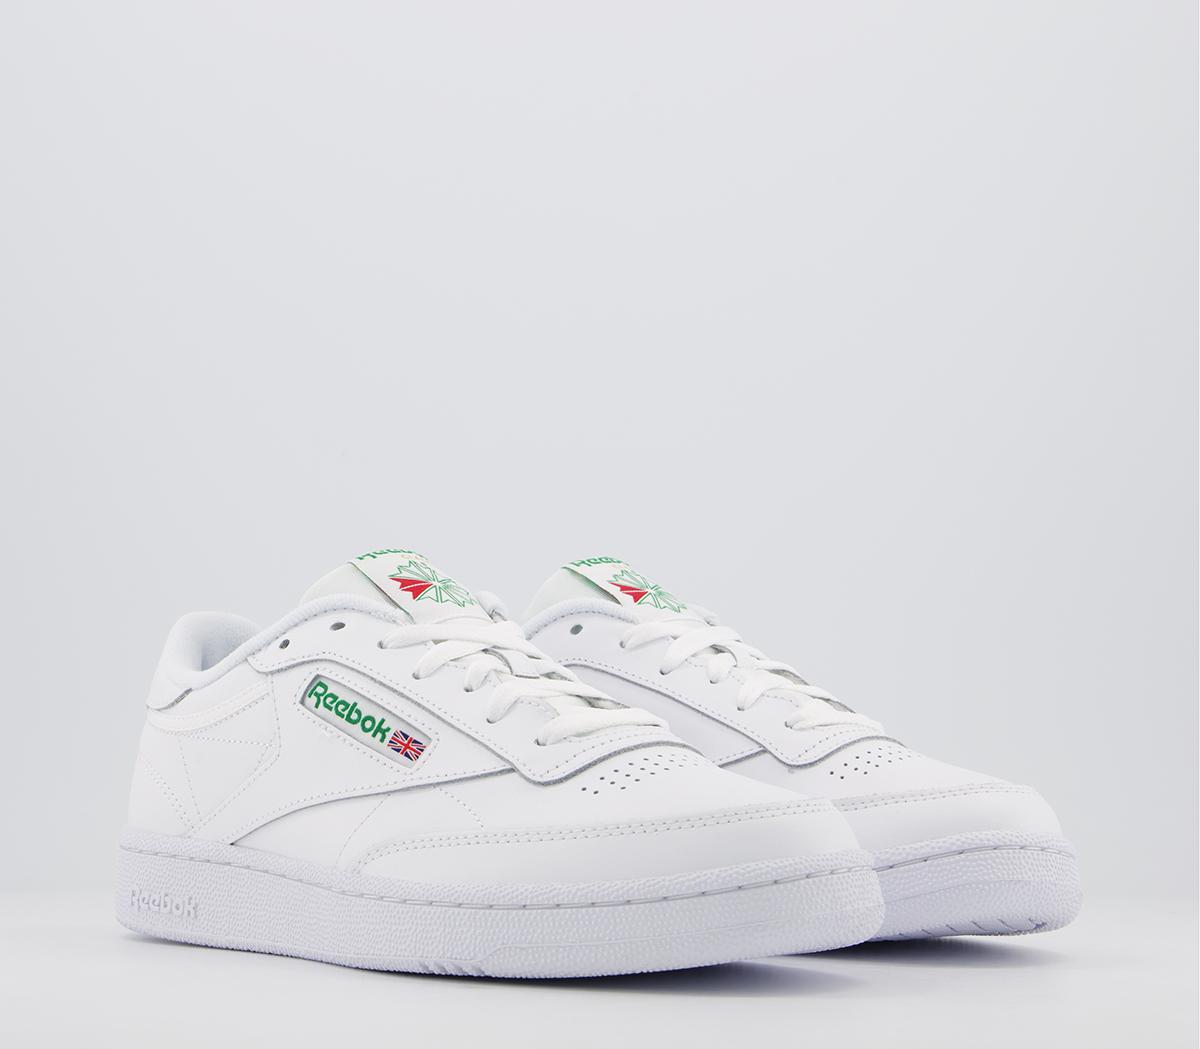 Reebok Club C 85 In White And Green, 5